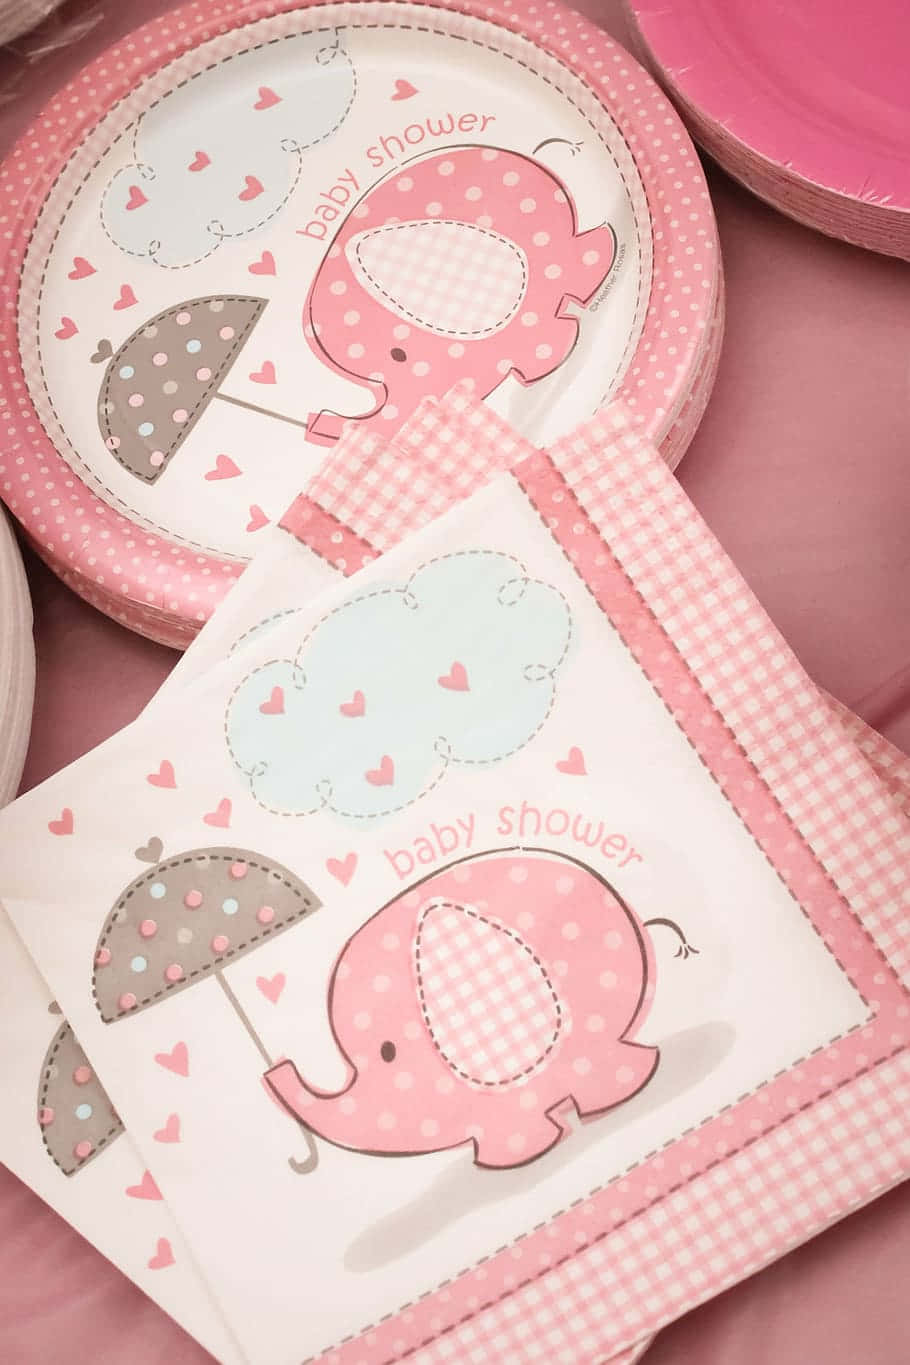 Baby Shower Party Supplies Wallpaper